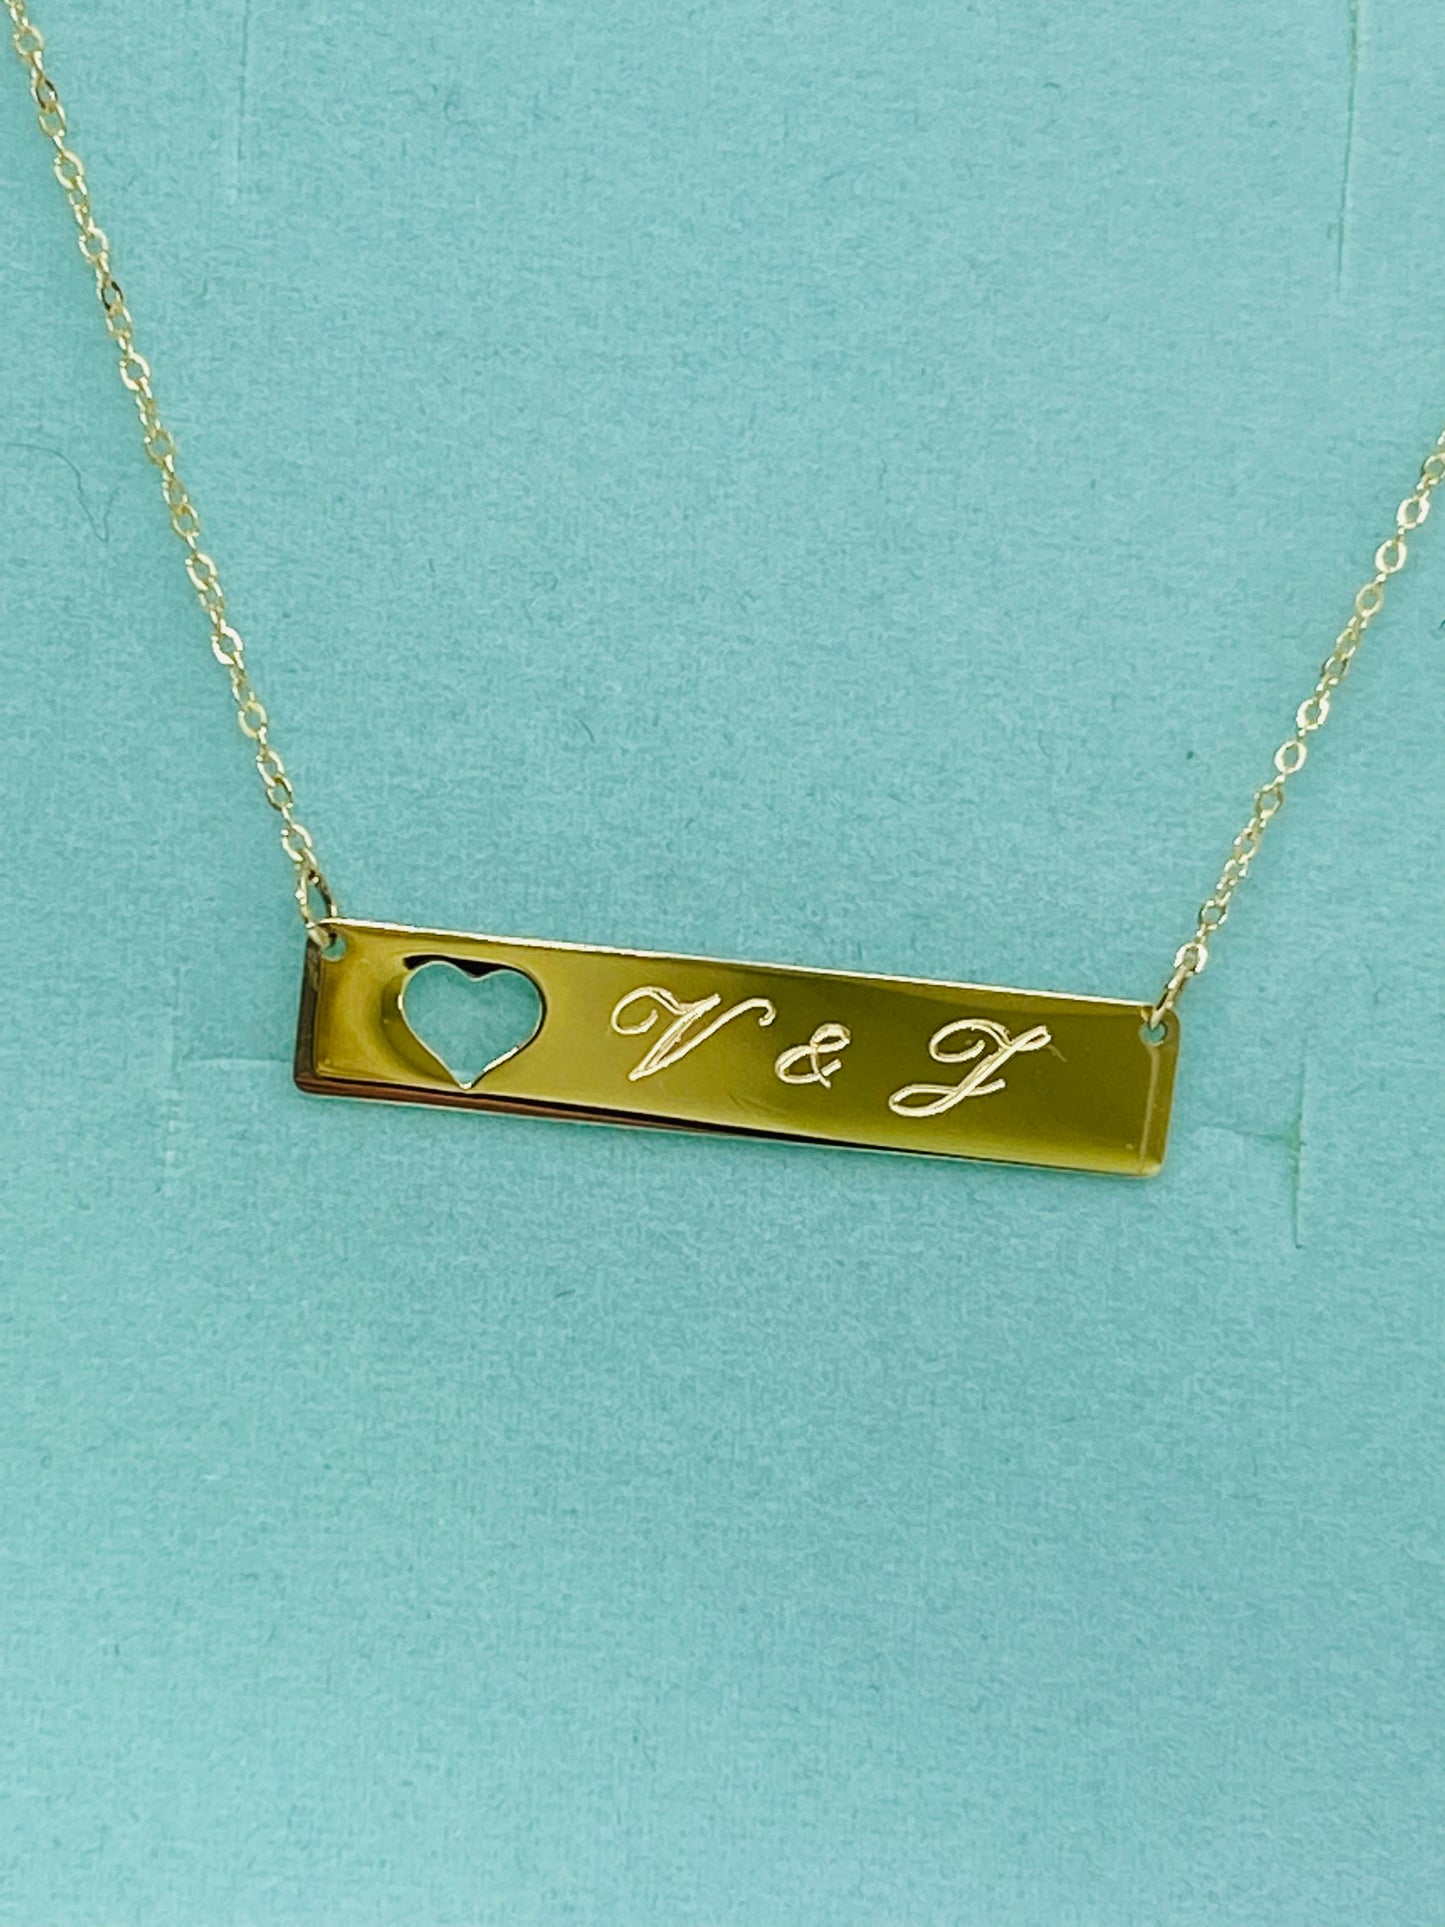 Engravable Plate with Carved-Out Heart Necklace 14K Yellow Gold